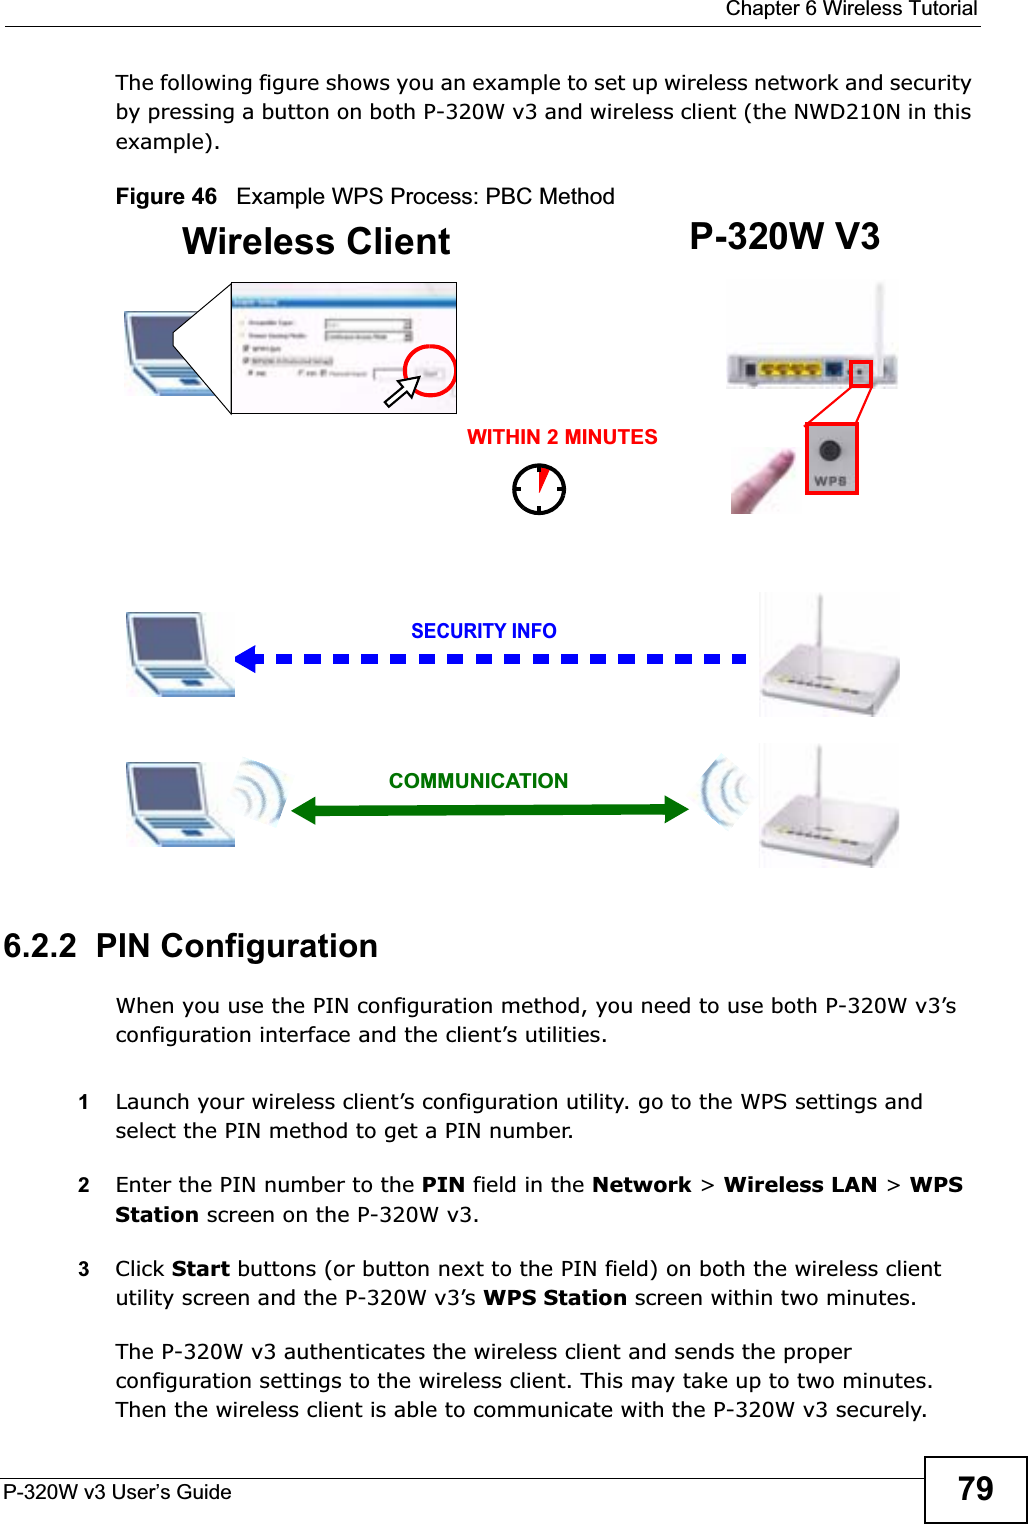  Chapter 6 Wireless TutorialP-320W v3 User’s Guide 79The following figure shows you an example to set up wireless network and security by pressing a button on both P-320W v3 and wireless client (the NWD210N in this example).Figure 46   Example WPS Process: PBC Method6.2.2  PIN ConfigurationWhen you use the PIN configuration method, you need to use both P-320W v3’s configuration interface and the client’s utilities.1Launch your wireless client’s configuration utility. go to the WPS settings and select the PIN method to get a PIN number.   2Enter the PIN number to the PIN field in the Network &gt; Wireless LAN &gt;WPSStation screen on the P-320W v3. 3Click Start buttons (or button next to the PIN field) on both the wireless client utility screen and the P-320W v3’s WPS Station screen within two minutes. The P-320W v3 authenticates the wireless client and sends the proper configuration settings to the wireless client. This may take up to two minutes. Then the wireless client is able to communicate with the P-320W v3 securely. Wireless Client P-320W V3SECURITY INFOCOMMUNICATIONWITHIN 2 MINUTES